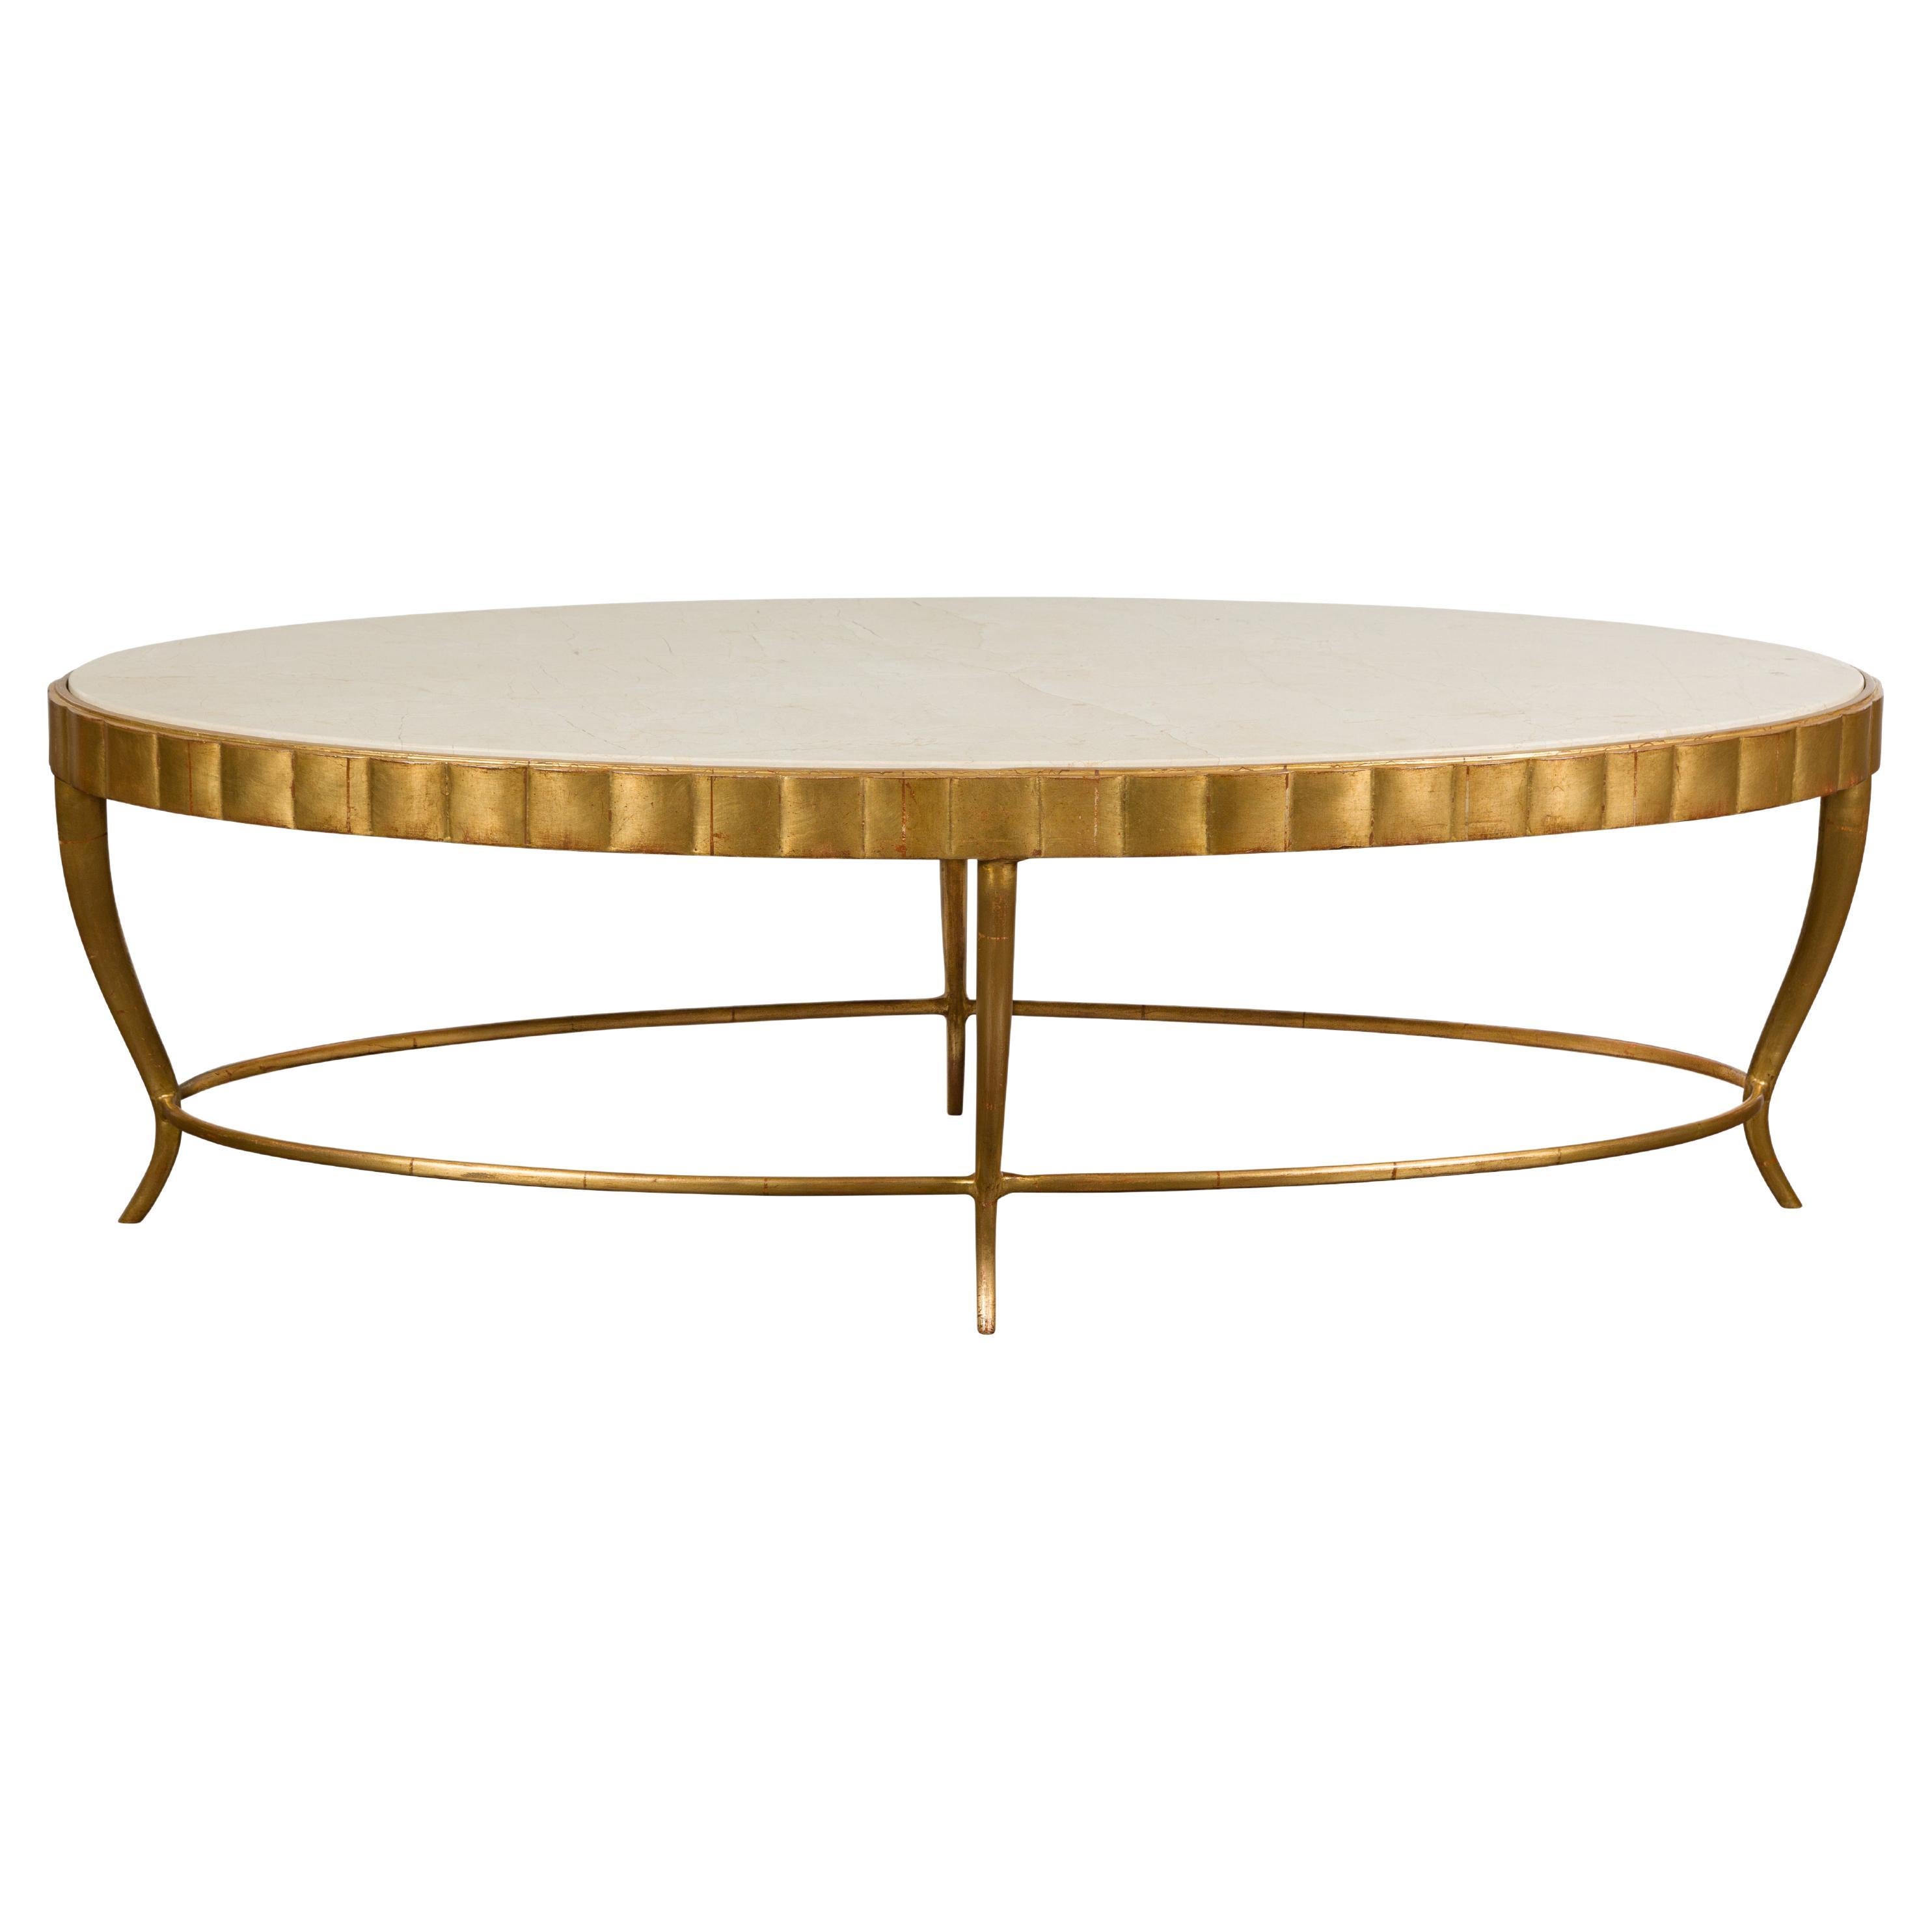 Italian Midcentury Gilt Metal Coffee Table with Oval Cream Marble Top